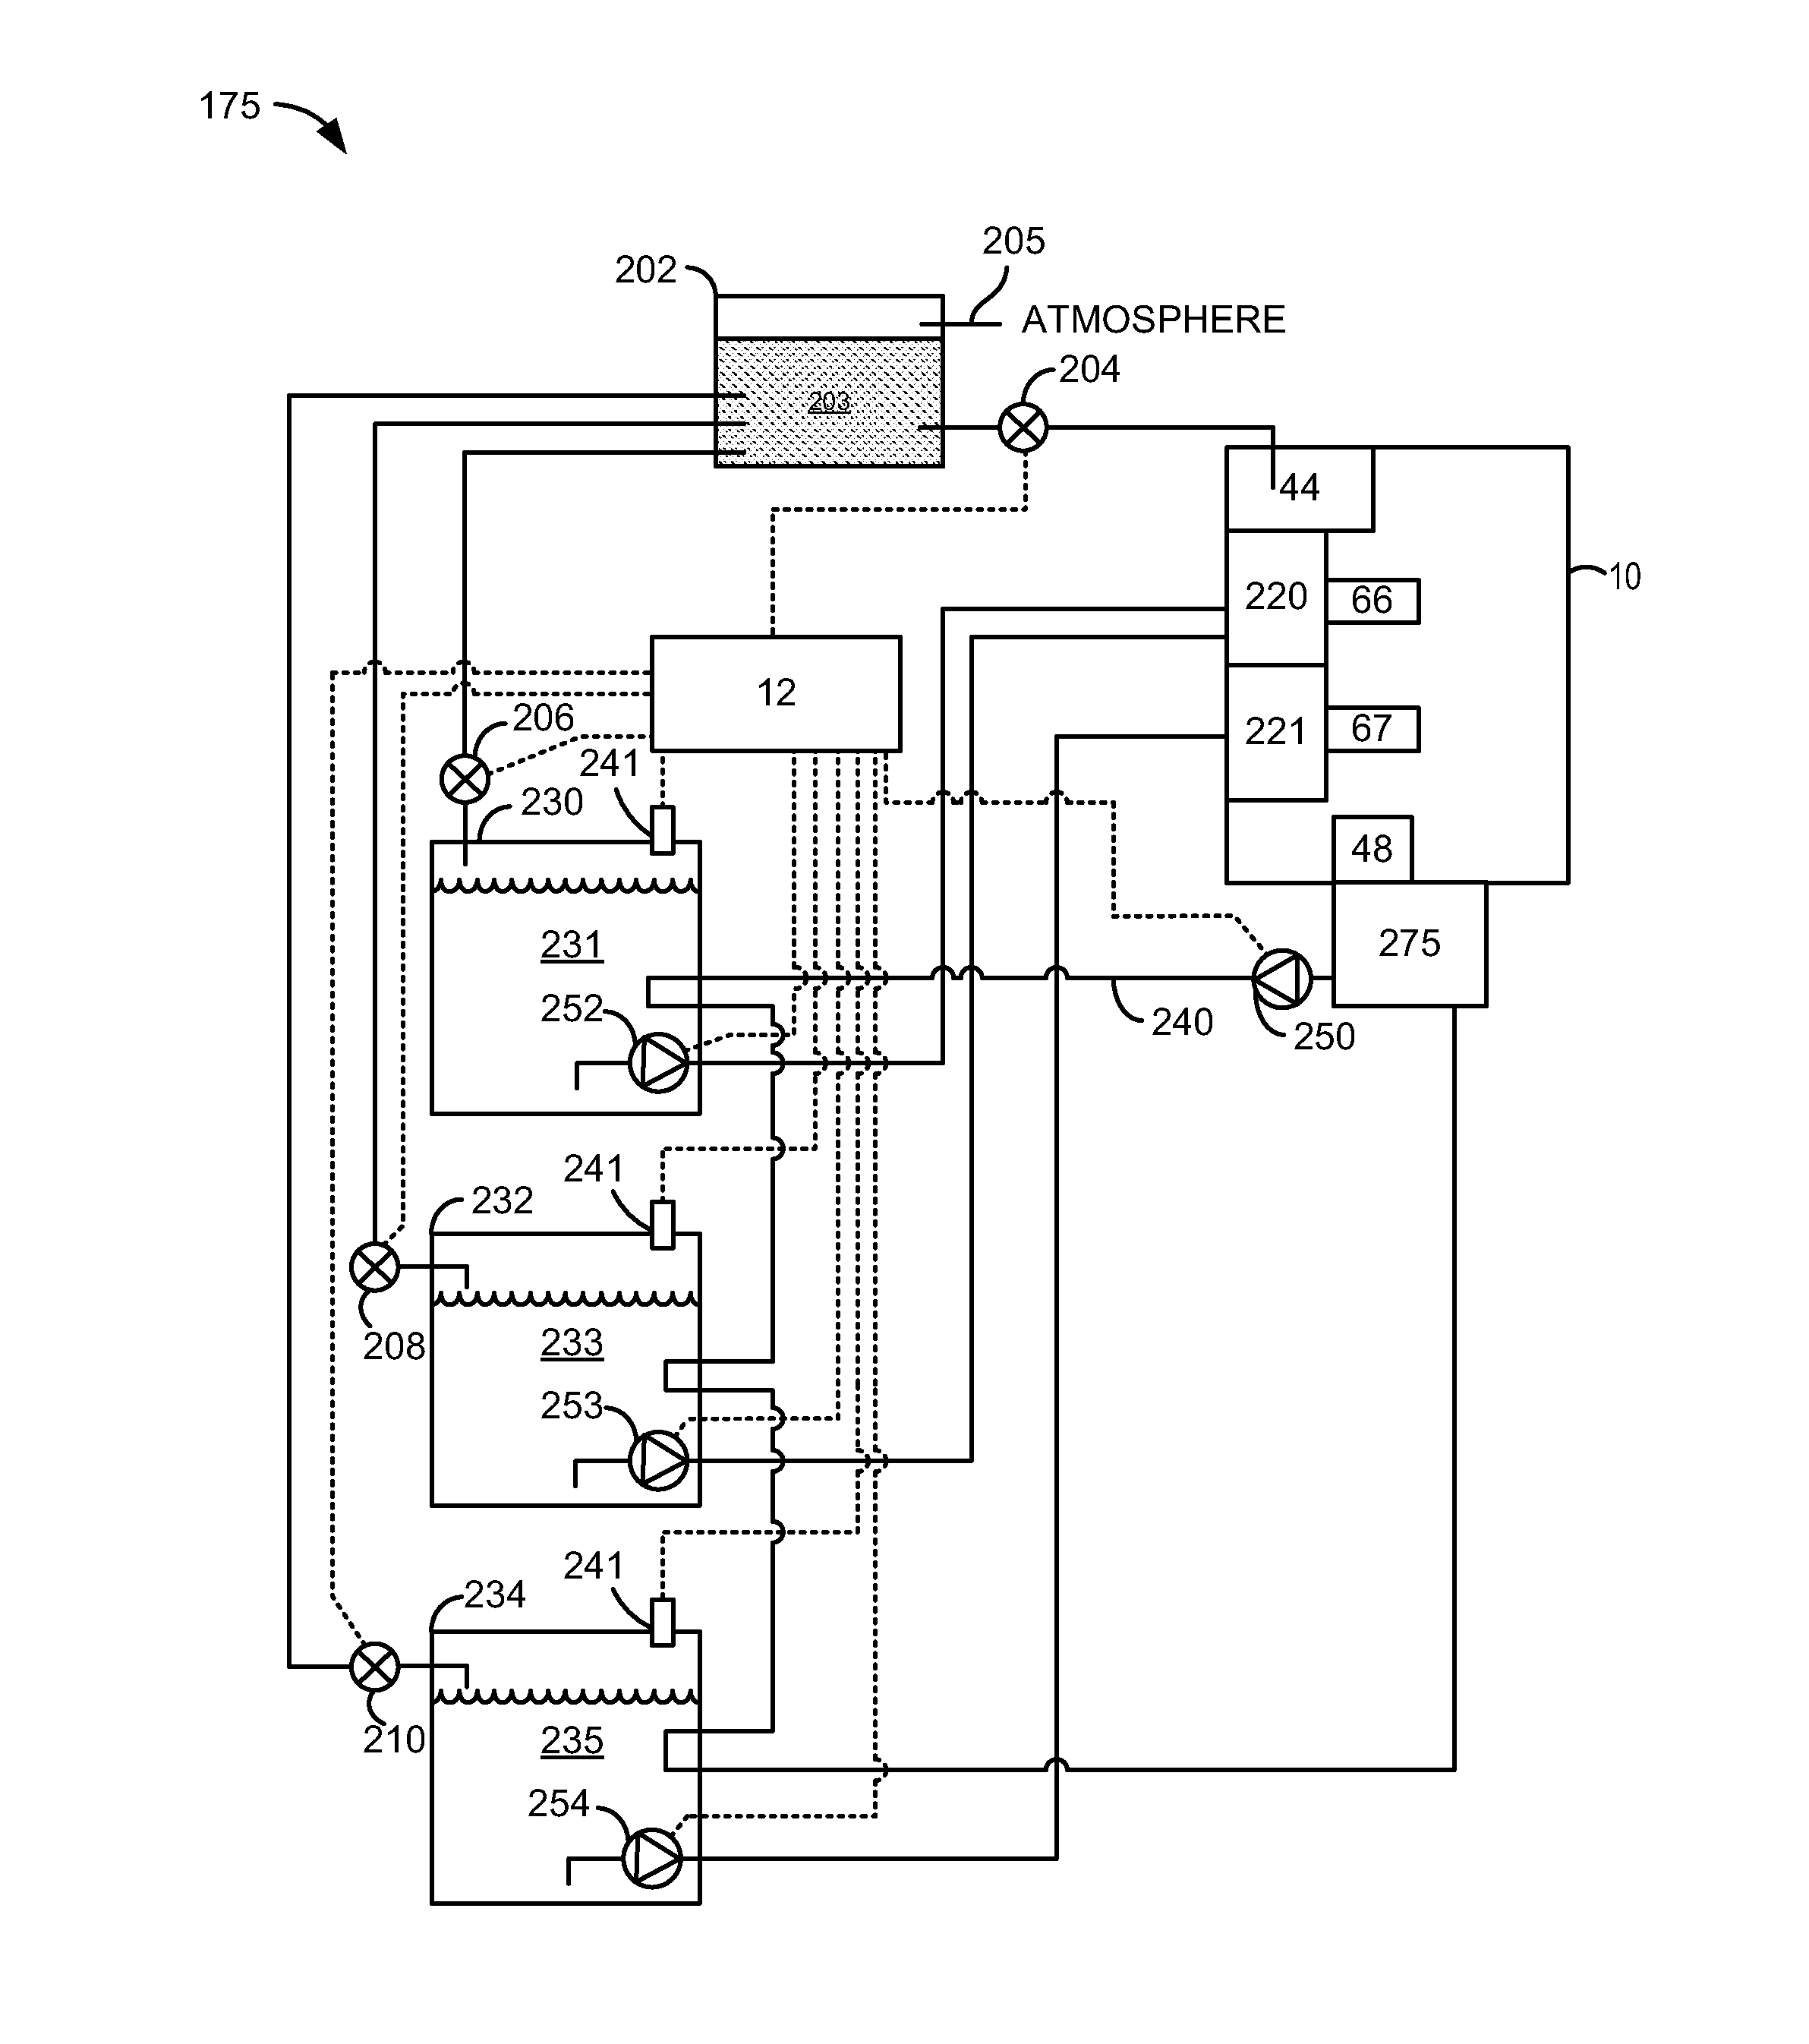 Fuel separation system for reducing parasitic losses